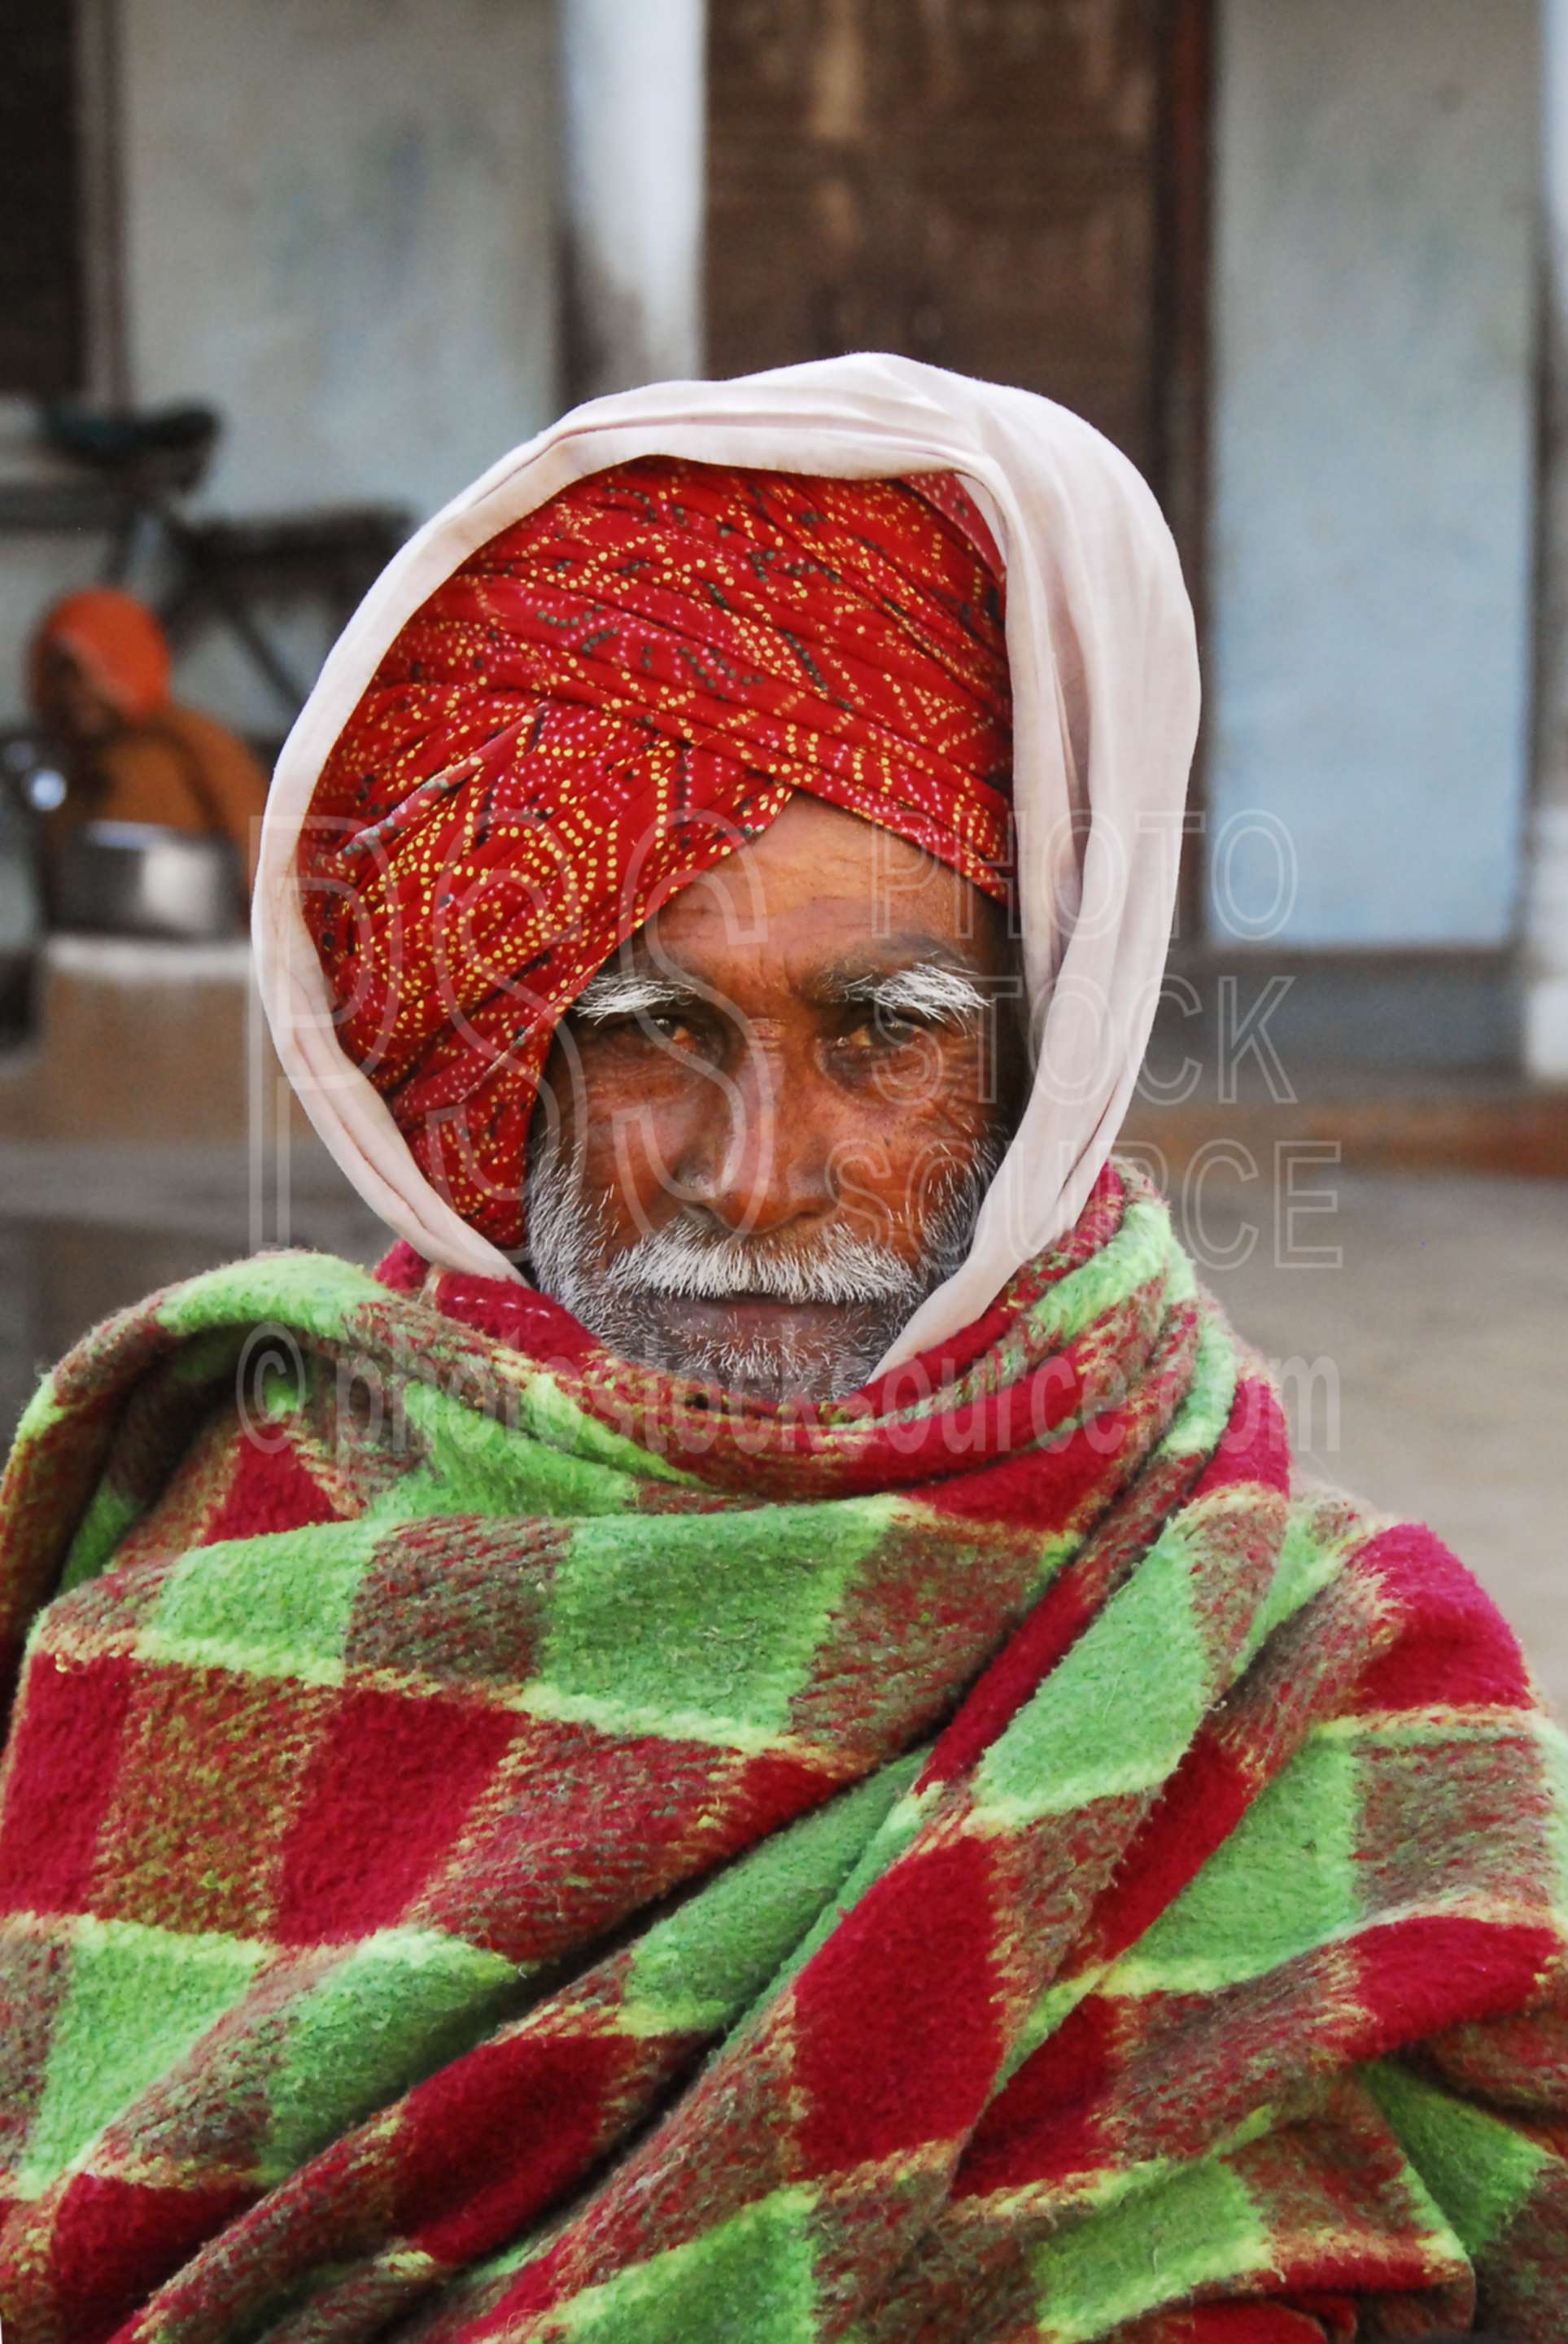 Man in Red Turban,man,turban,red,goat,young goat,holding,morning